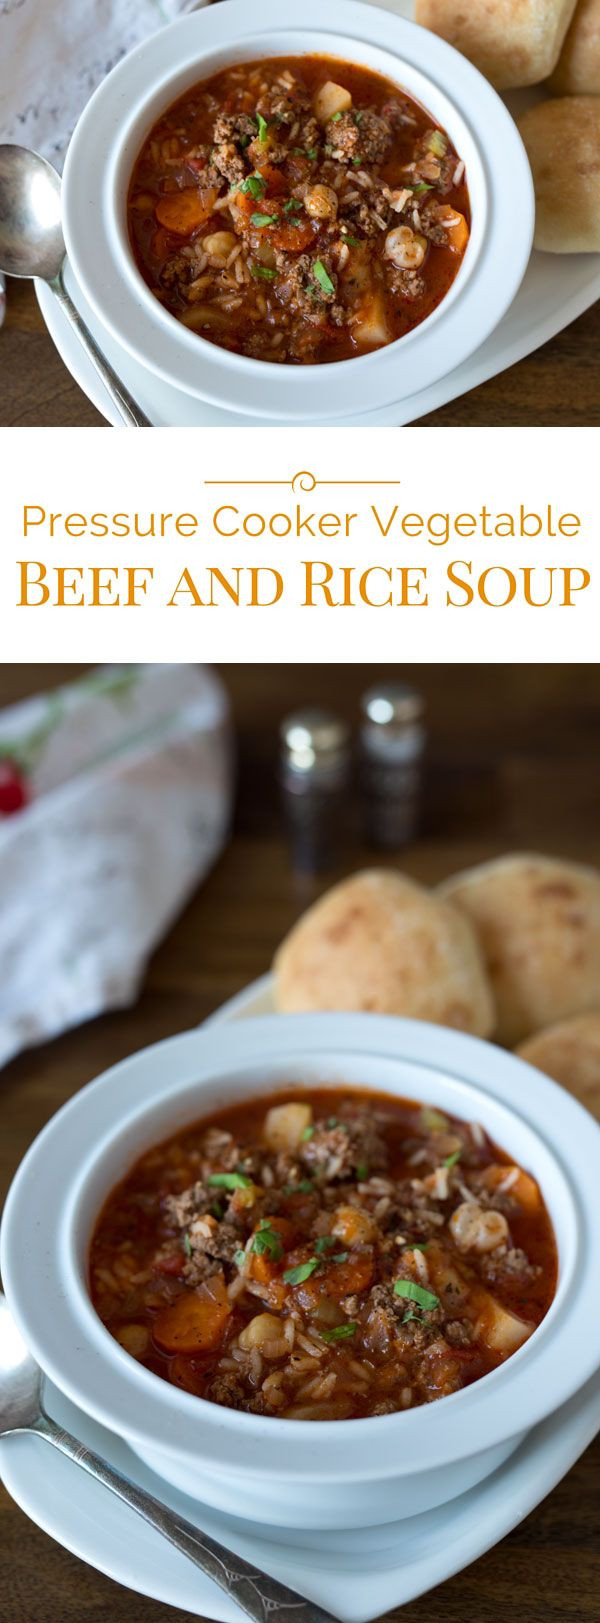 Pressure Cooker Beef Soup
 Pressure Cooker Ve able Beef and Rice Soup